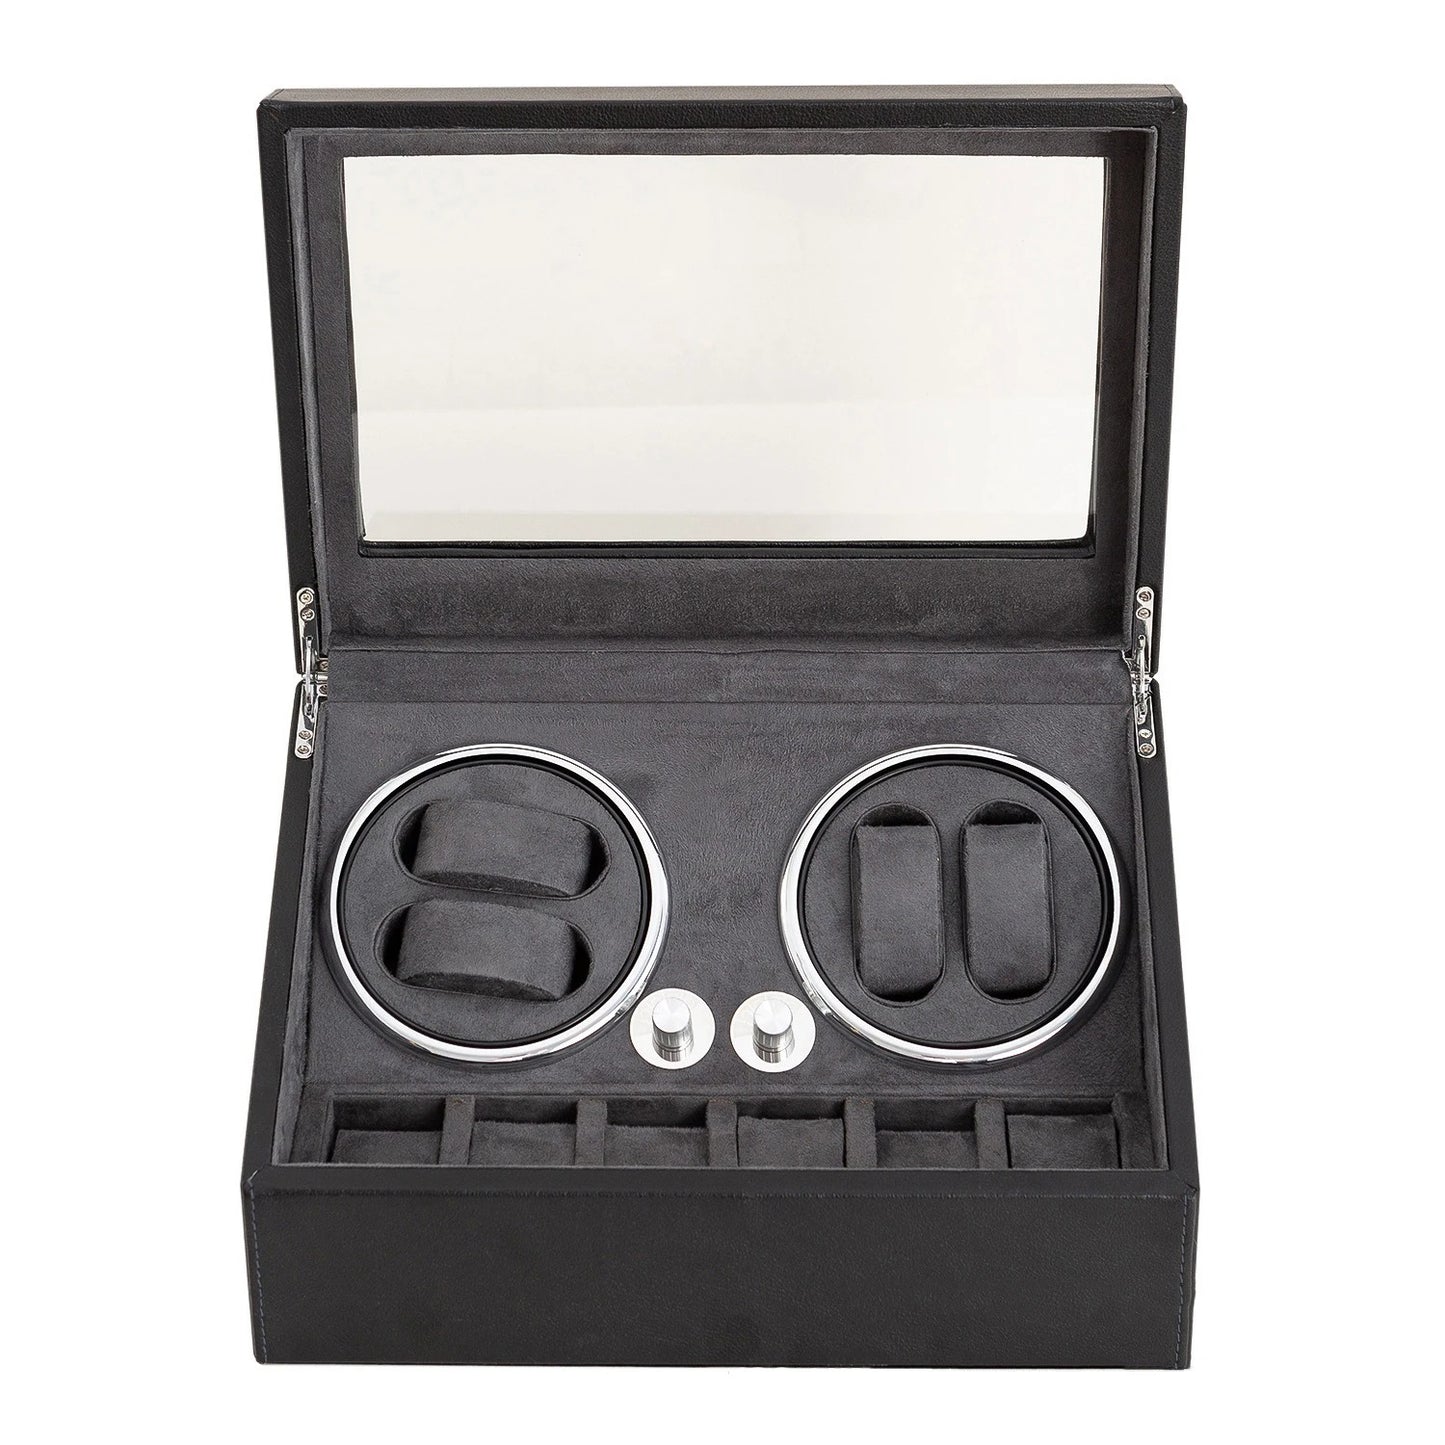 Four Piece Watch Winder with LED Lights